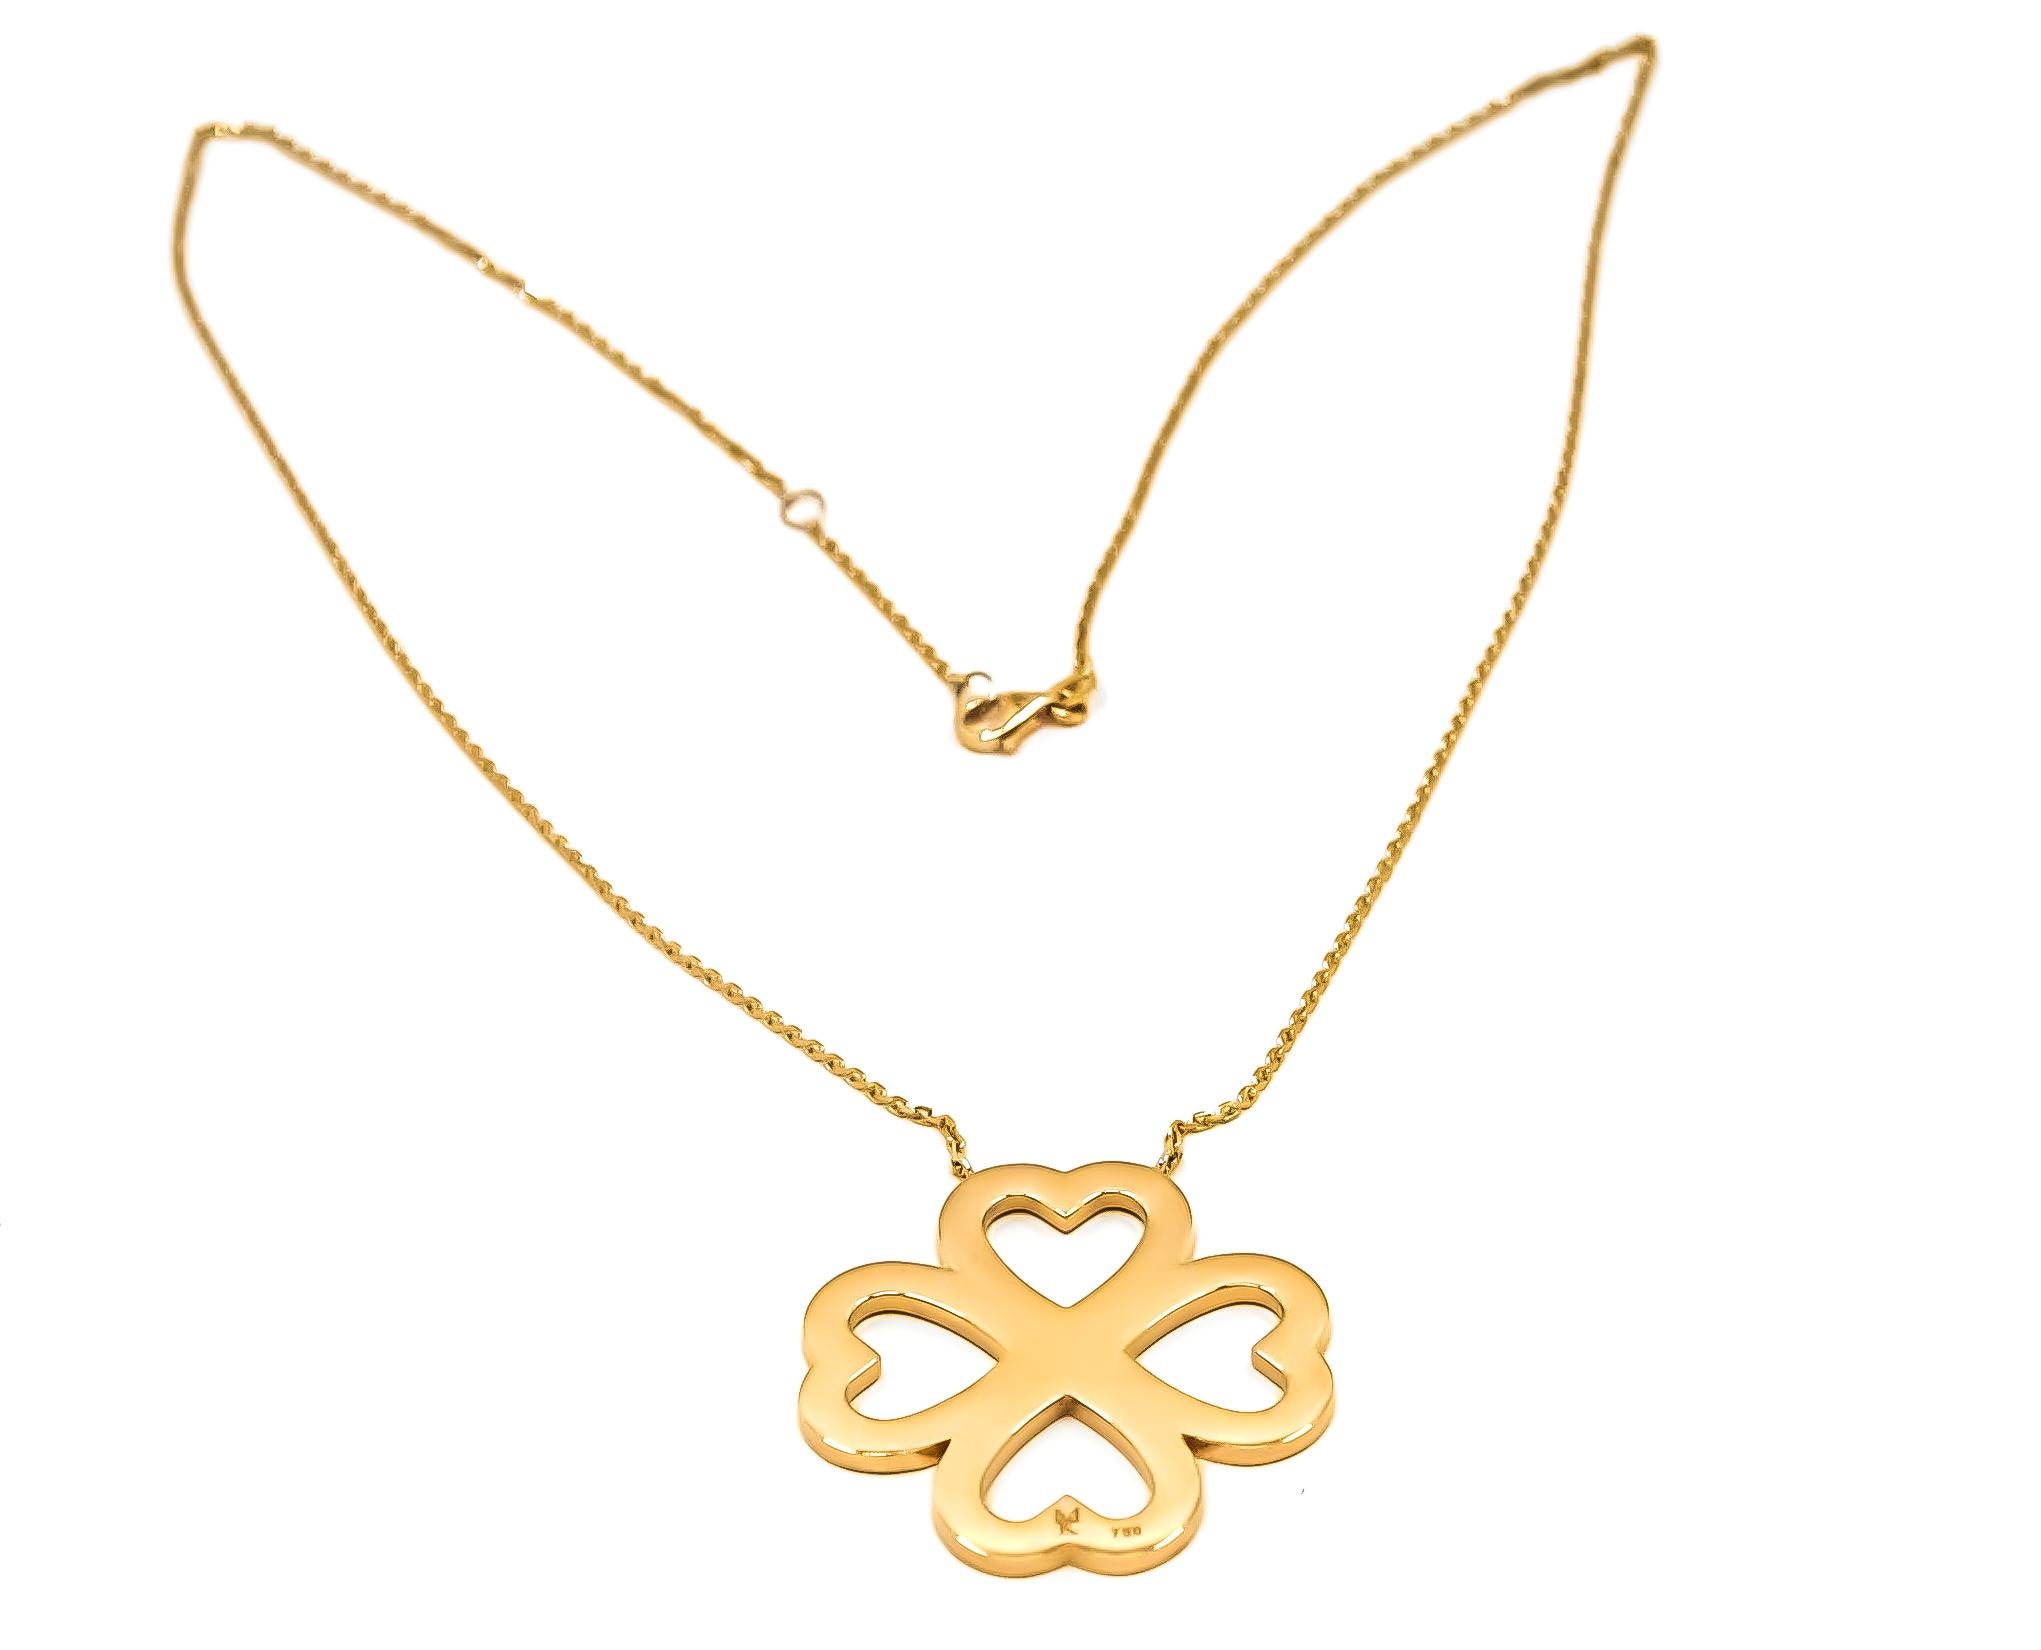 Romantic Heart Blossom Pendant Necklace in 18kt Gold For Sale